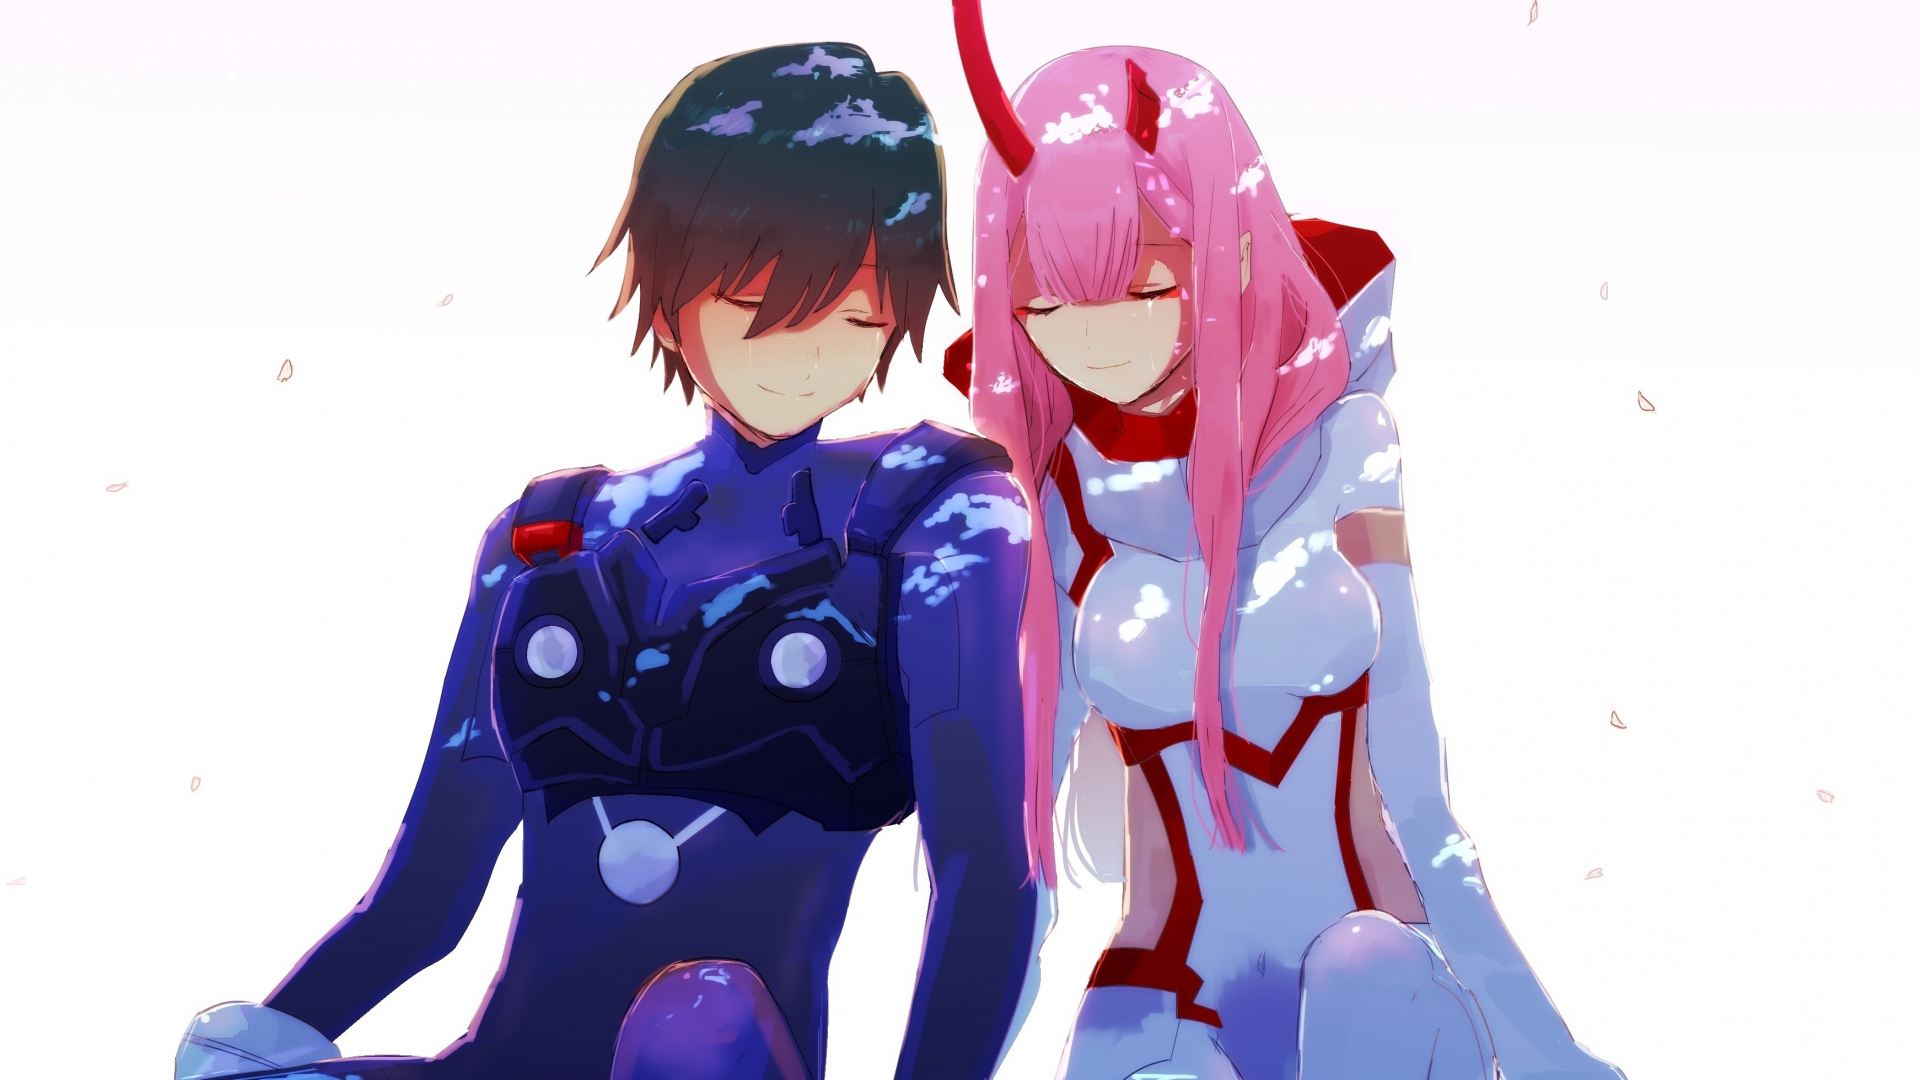 Download 1920x1080 Wallpaper Hiro And Zero Two Couple Anime Full Hd Hdtv Fhd 1080p 1920x1080 Hd Image Background 7159